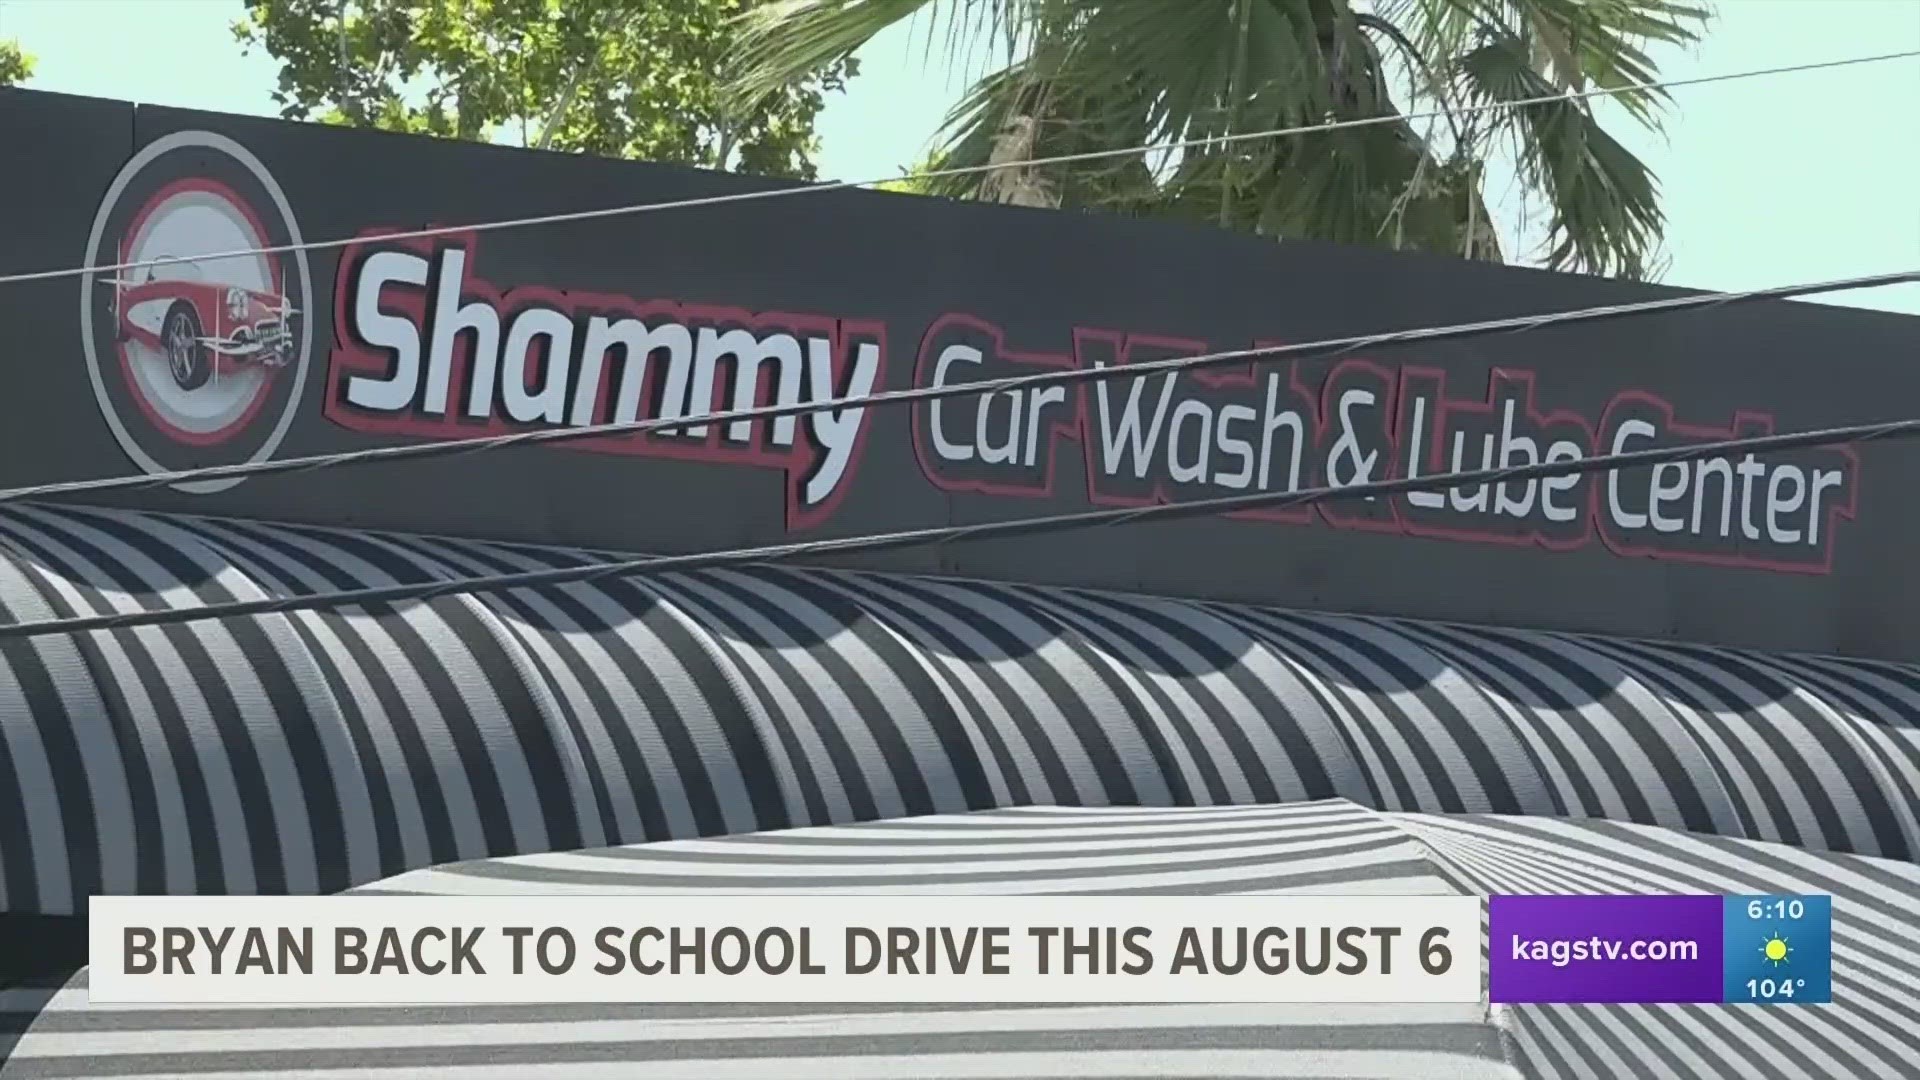 Adam and Tanisha Pickney have run a school supply drive for the past three years. This year's event will be held on August 6 at Shammy Car Wash in Bryan.